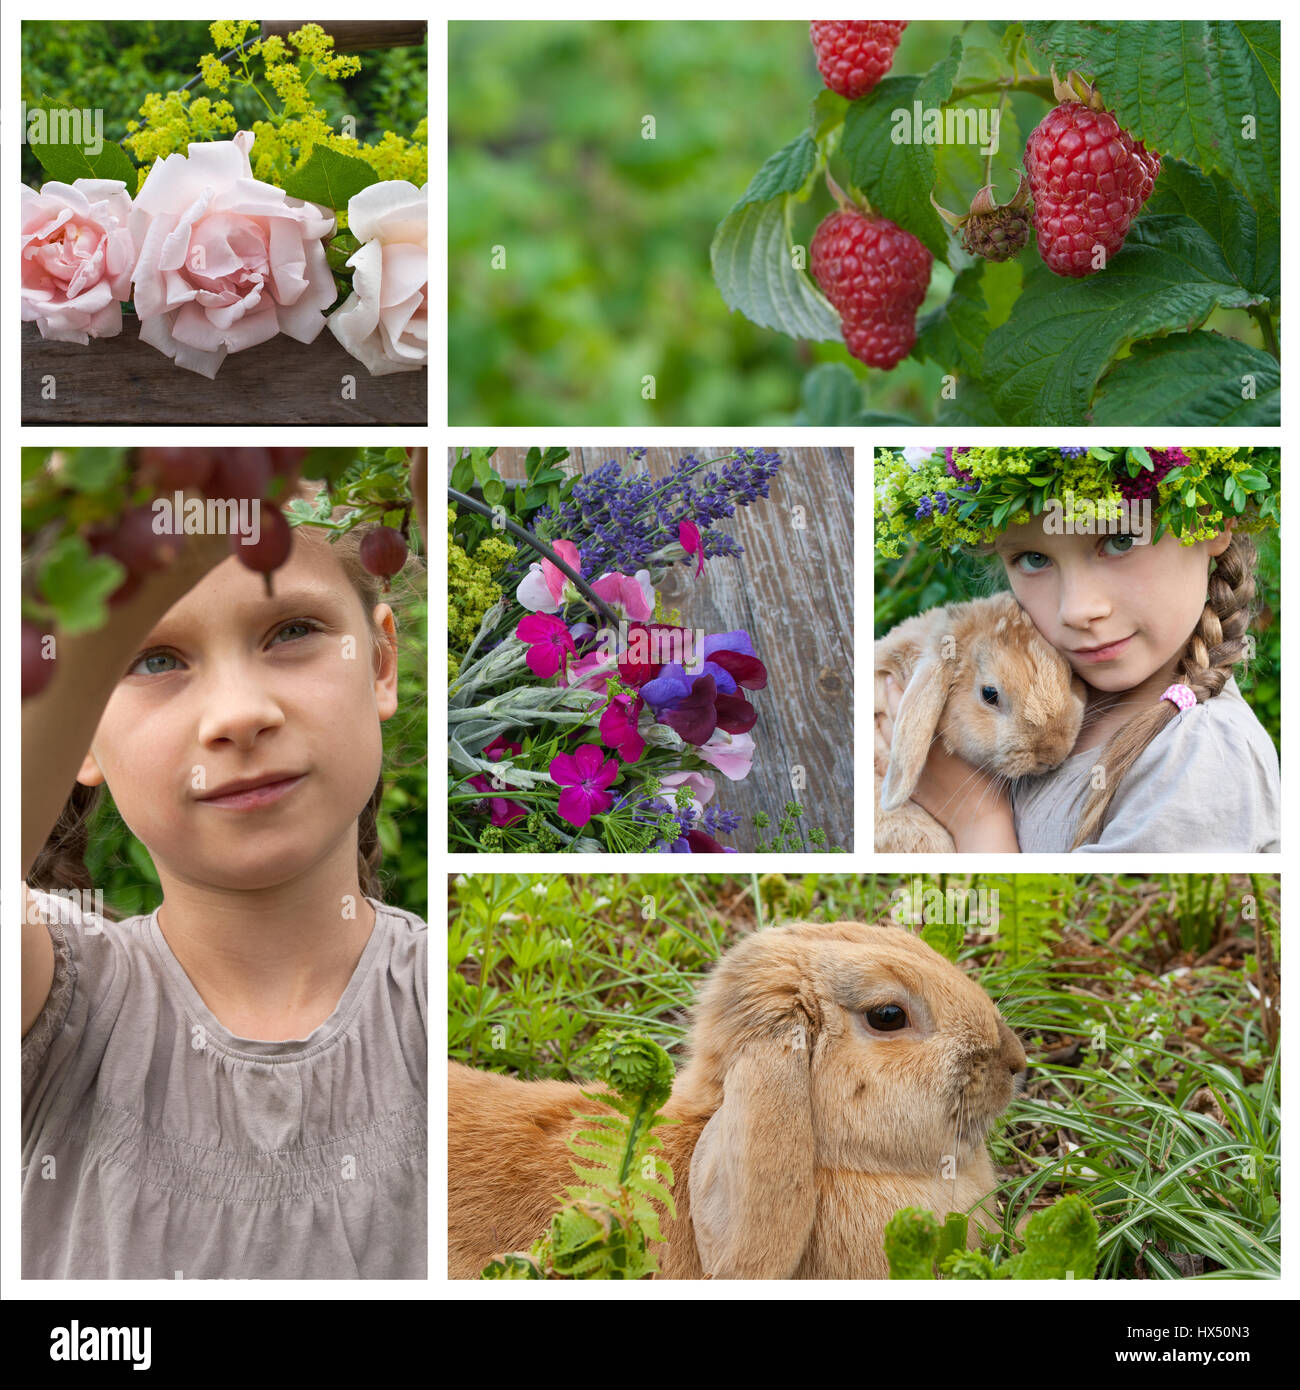 Collage avec young girl in garden Banque D'Images